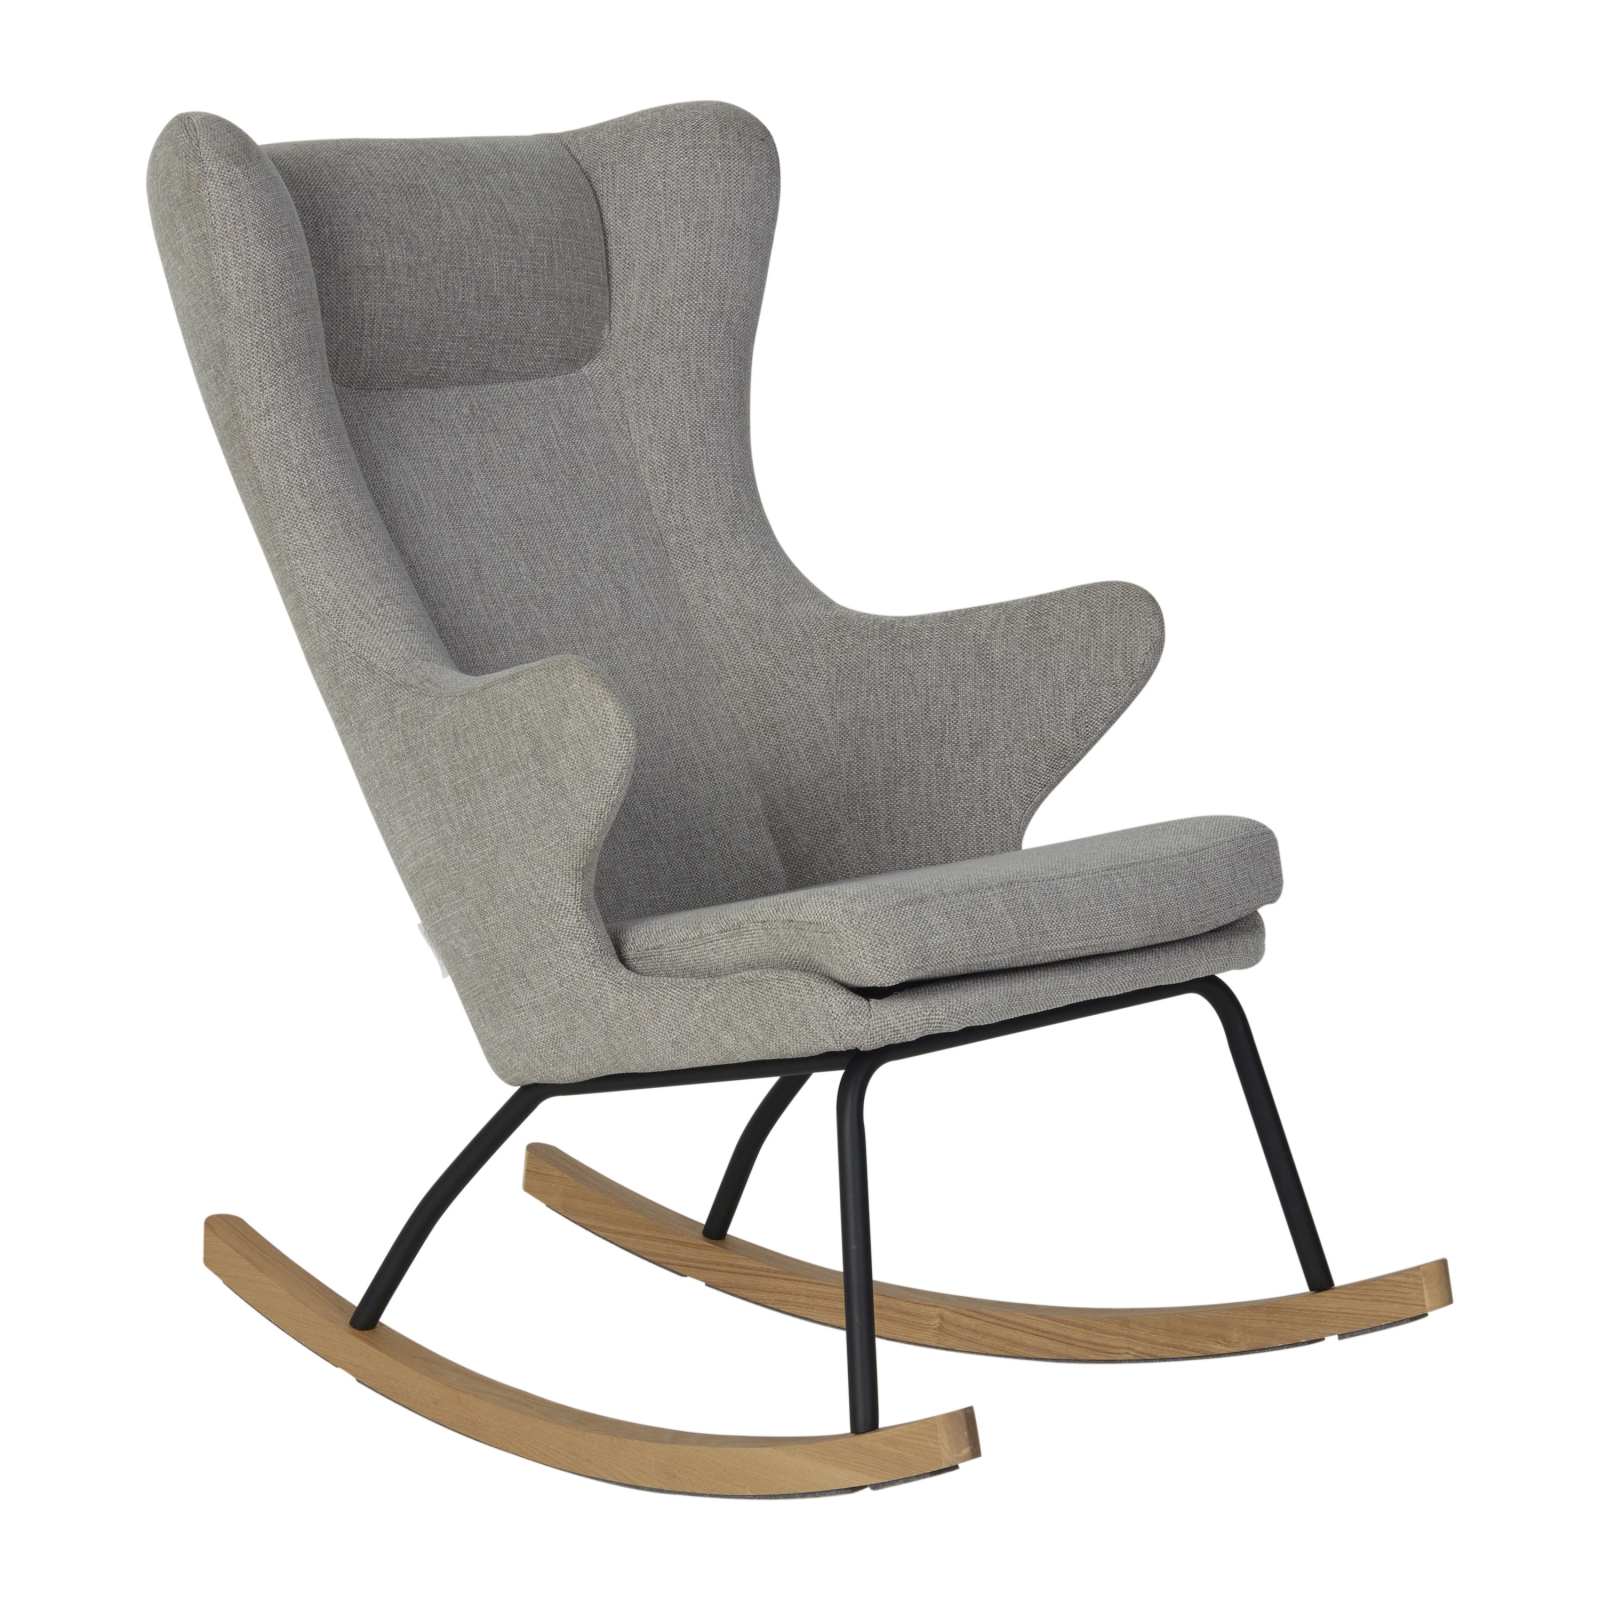 Order The Quax Rocking Adult Chair De Luxe Online Baby Plus